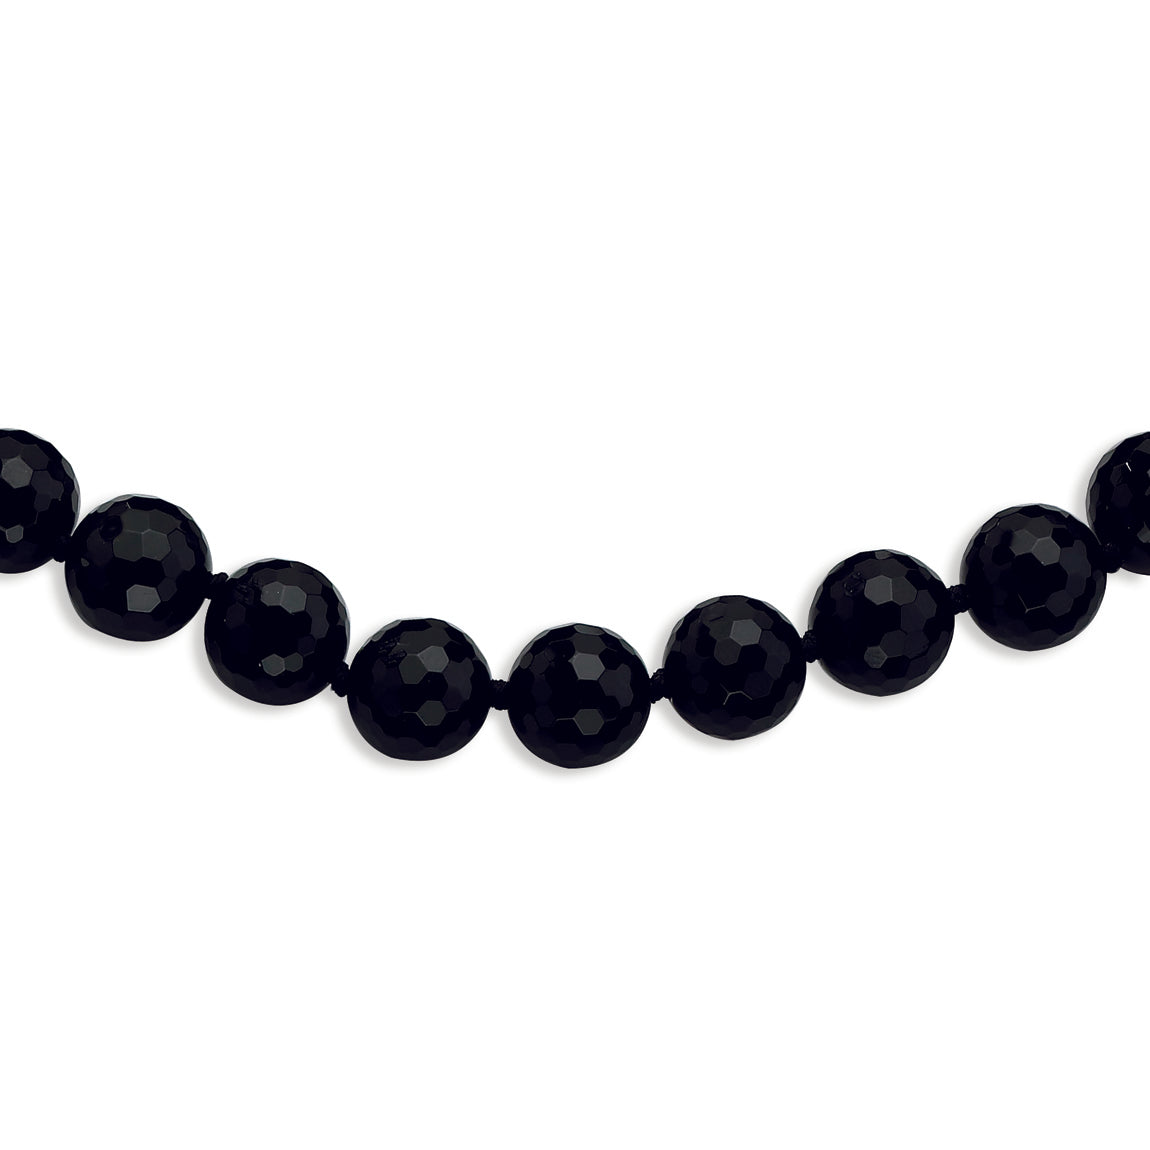 12-12.5mm Faceted Black Agate Necklace